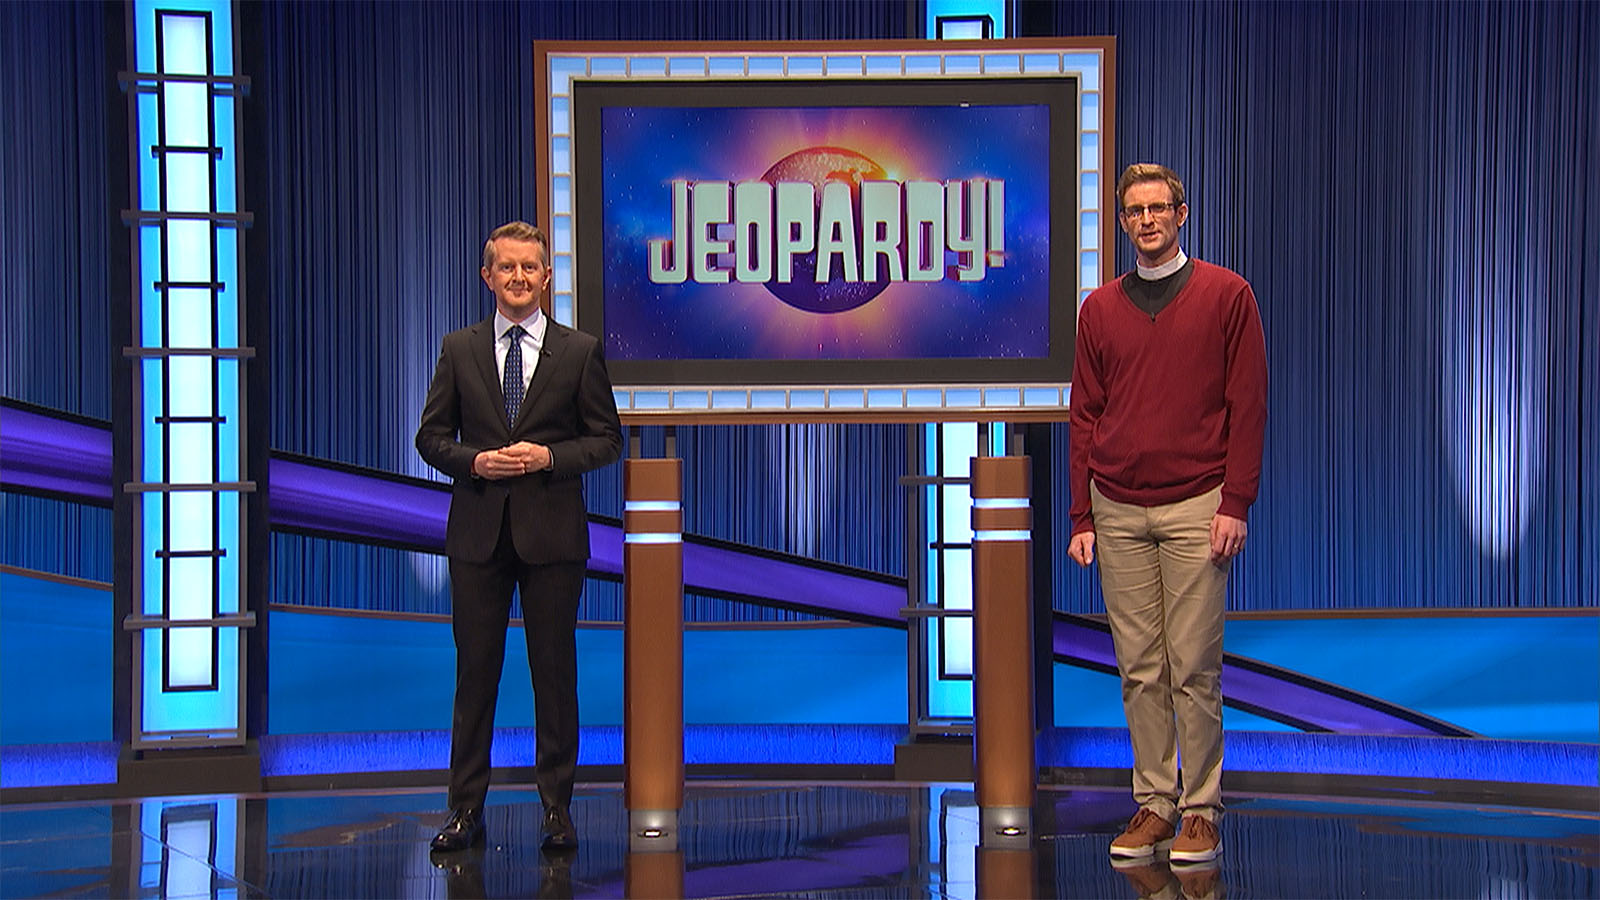 Jeopardy! co-host Ken Jennings, left, and the Rev. David Sibley pose together on the set. Photo courtesy of Jeopardy! Productions